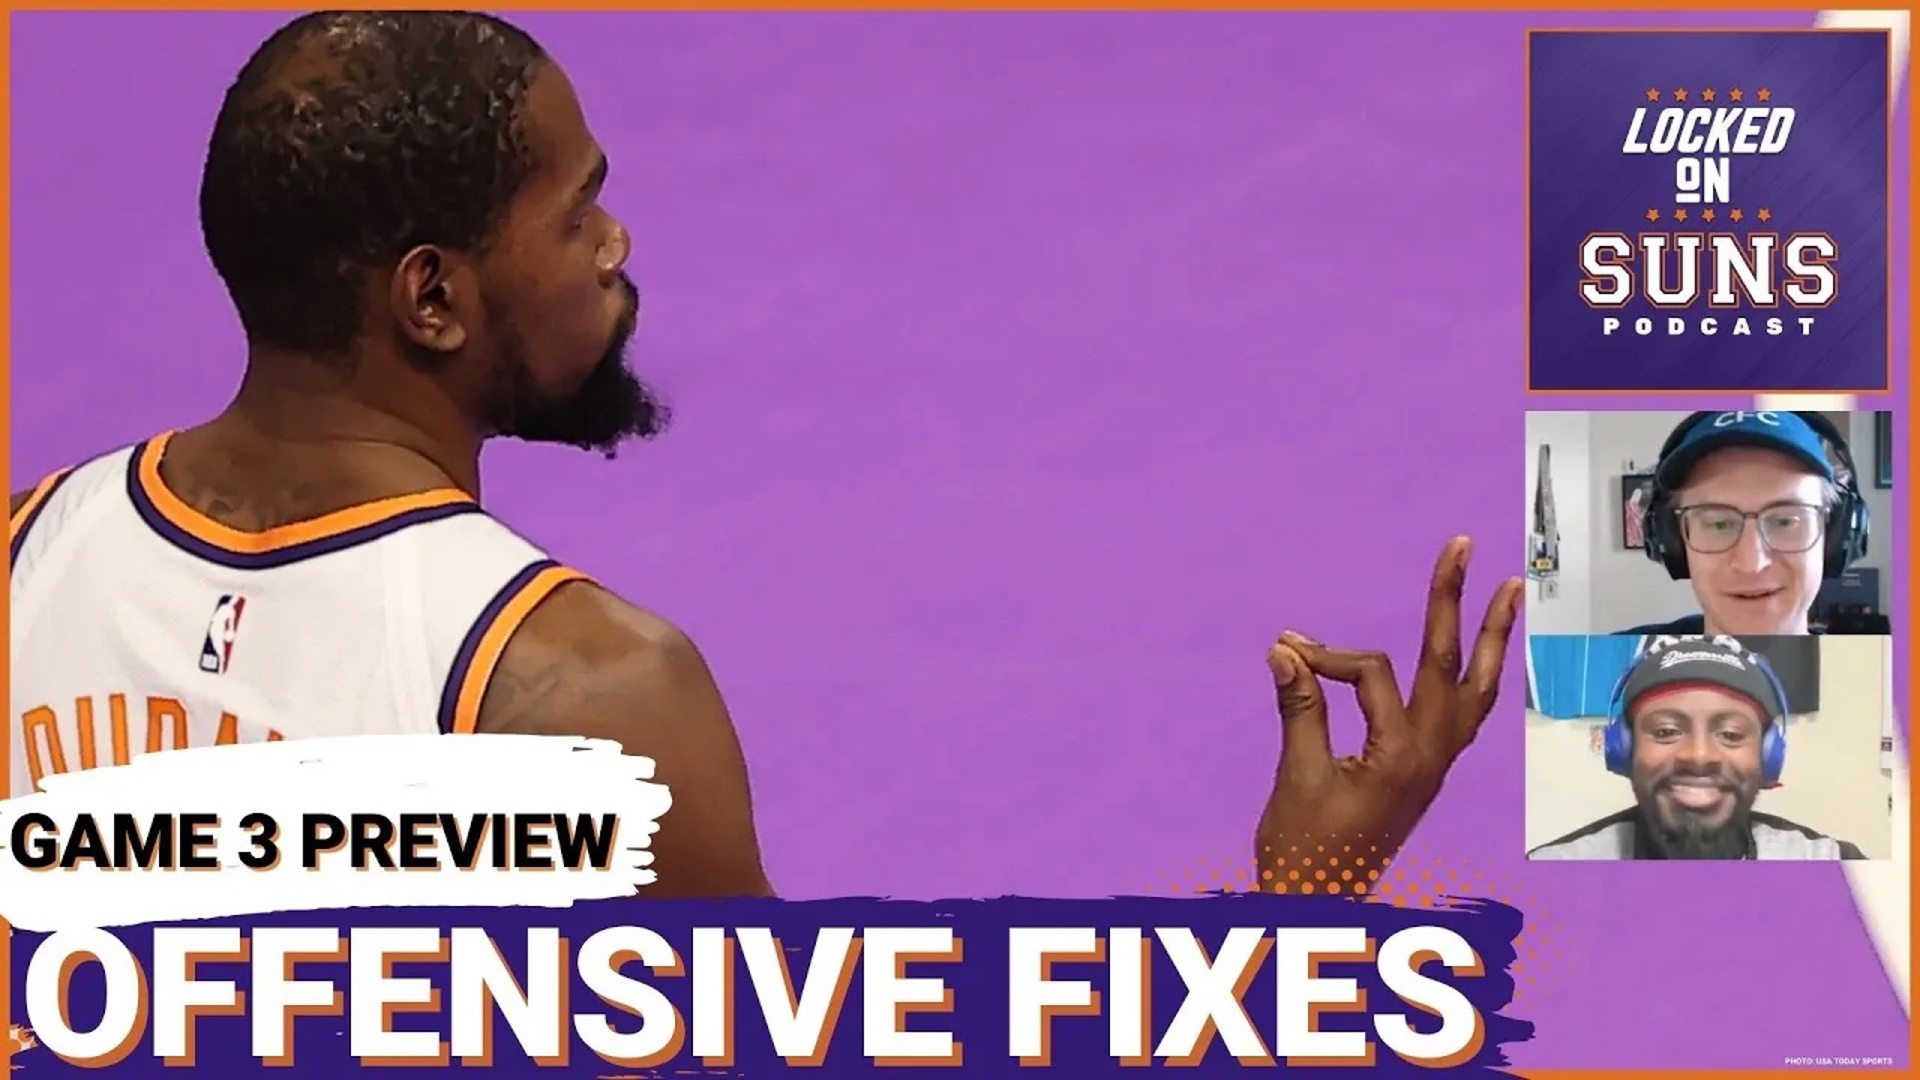 Devin Booker, Kevin Durant and the Phoenix Suns need to find what works on the offensive end to get back in their series against the Minnesota Timberwolves.